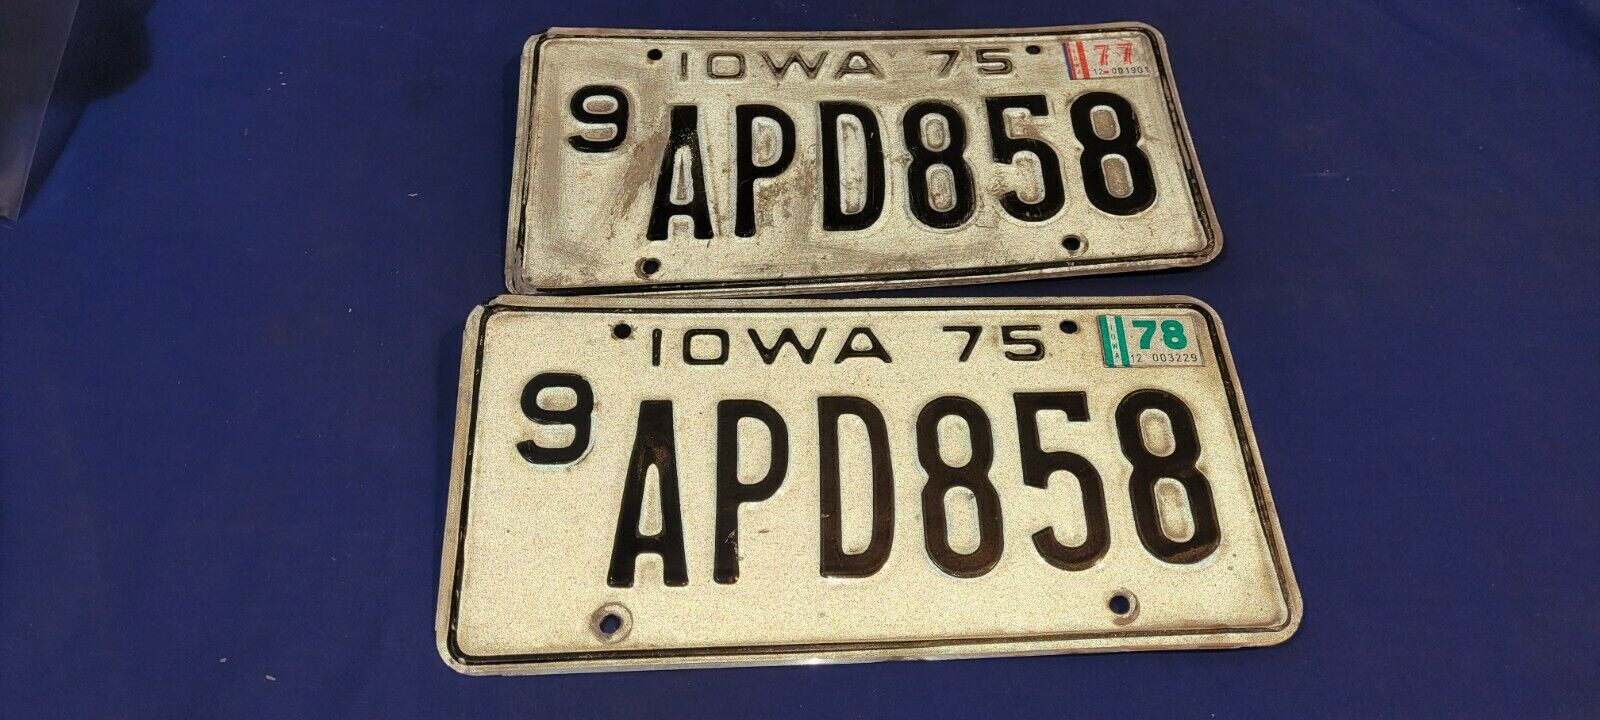 1975 Iowa License Plate Pair County 9  #apd858 Shipping Included